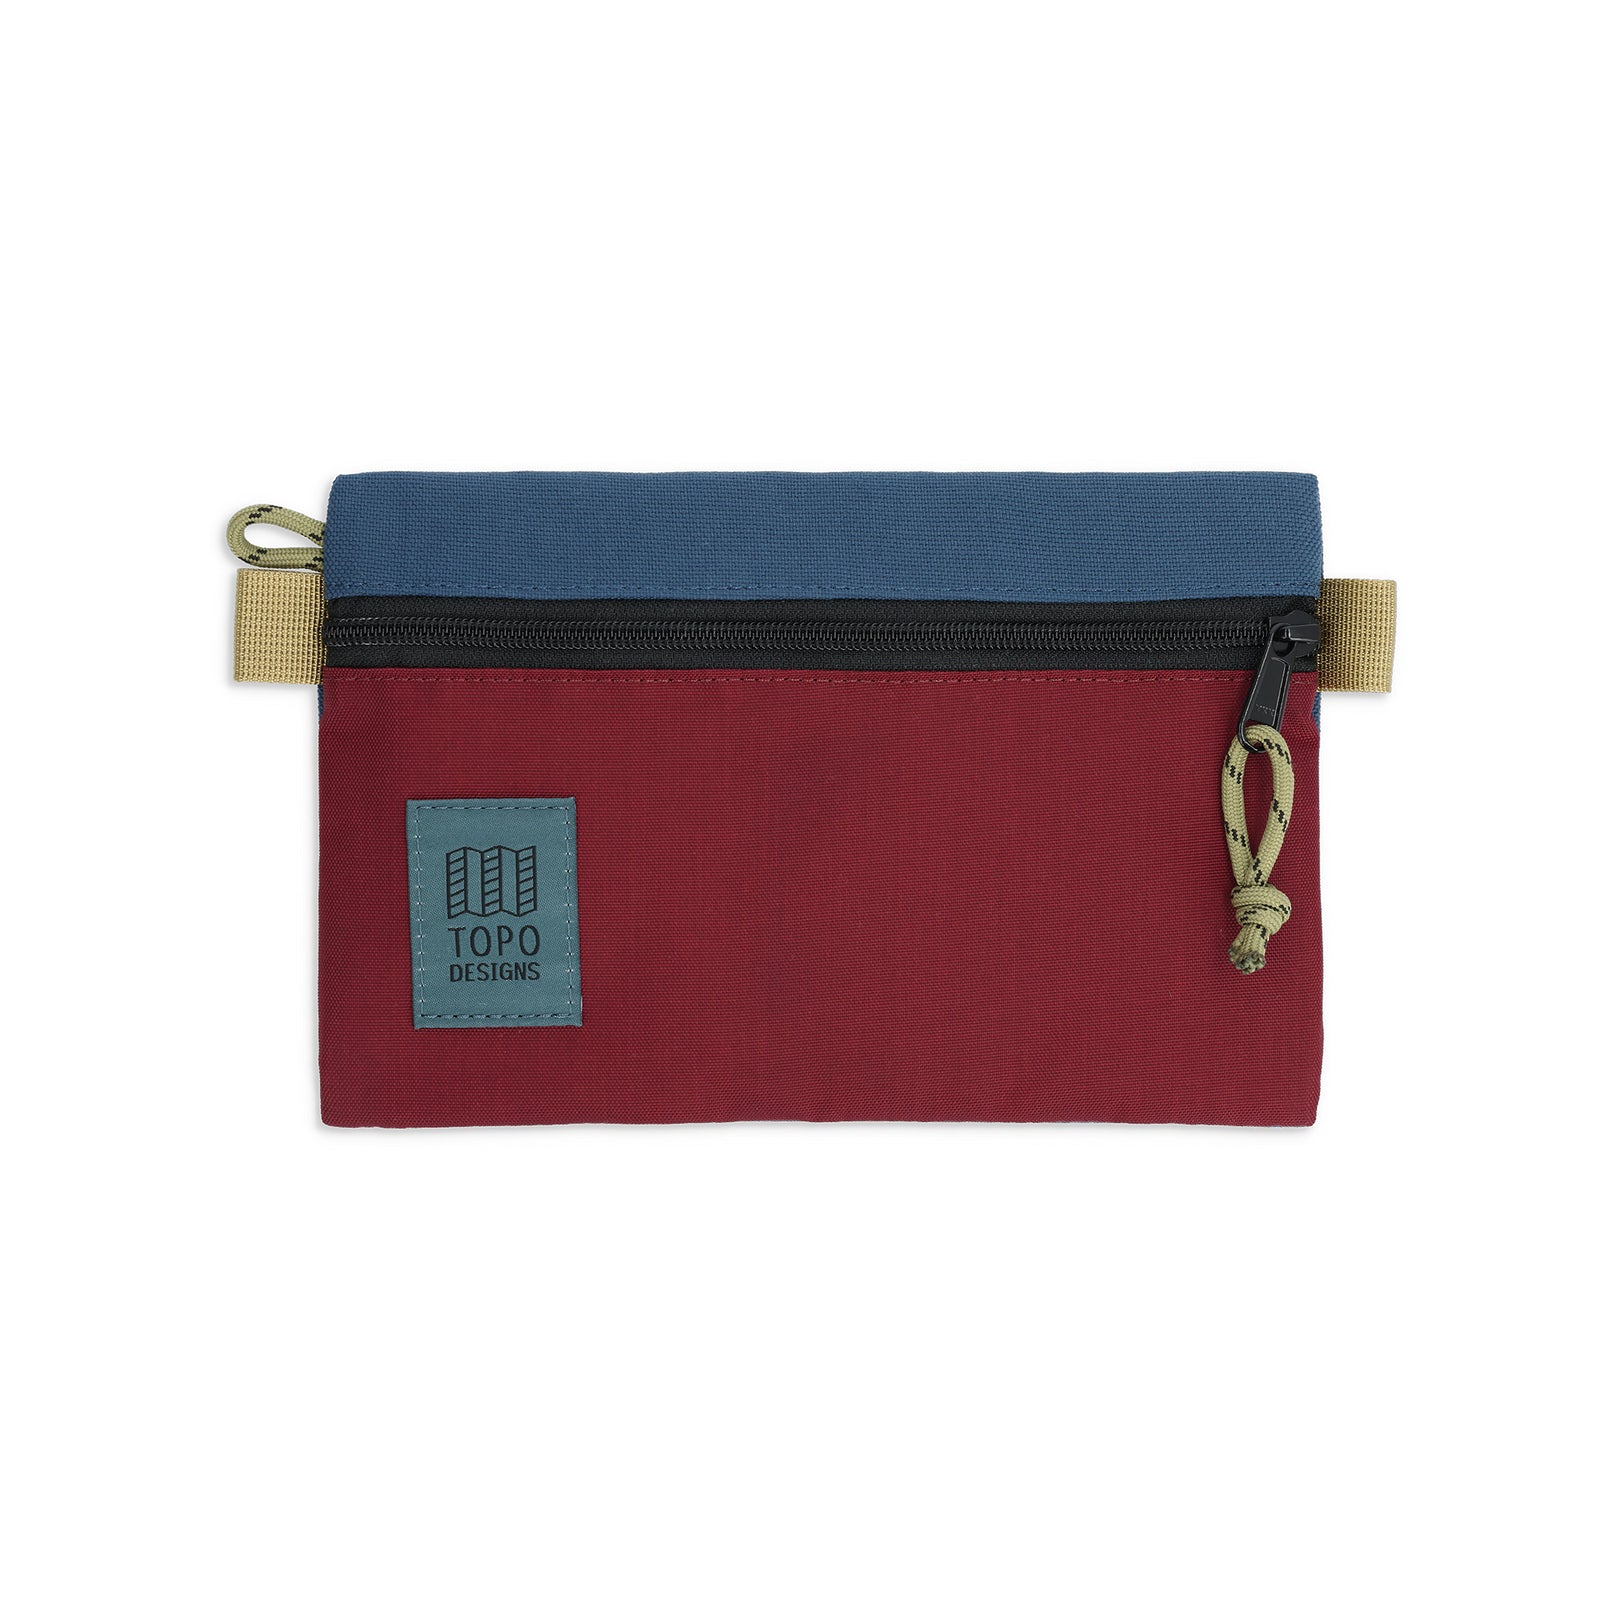 Front View of Topo Designs Accessory Bags in "Small" "Dark Denim / Burgundy"